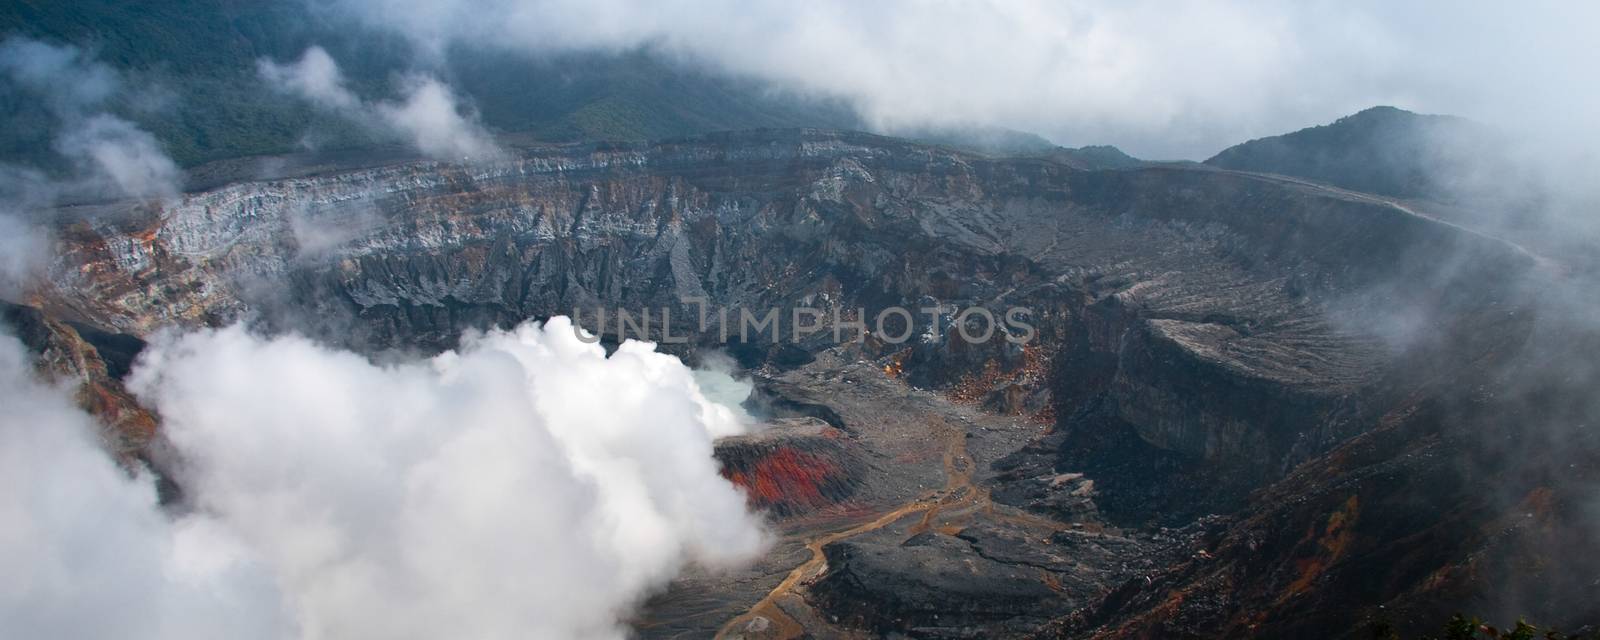 Main crater of Poas Volcano by CelsoDiniz